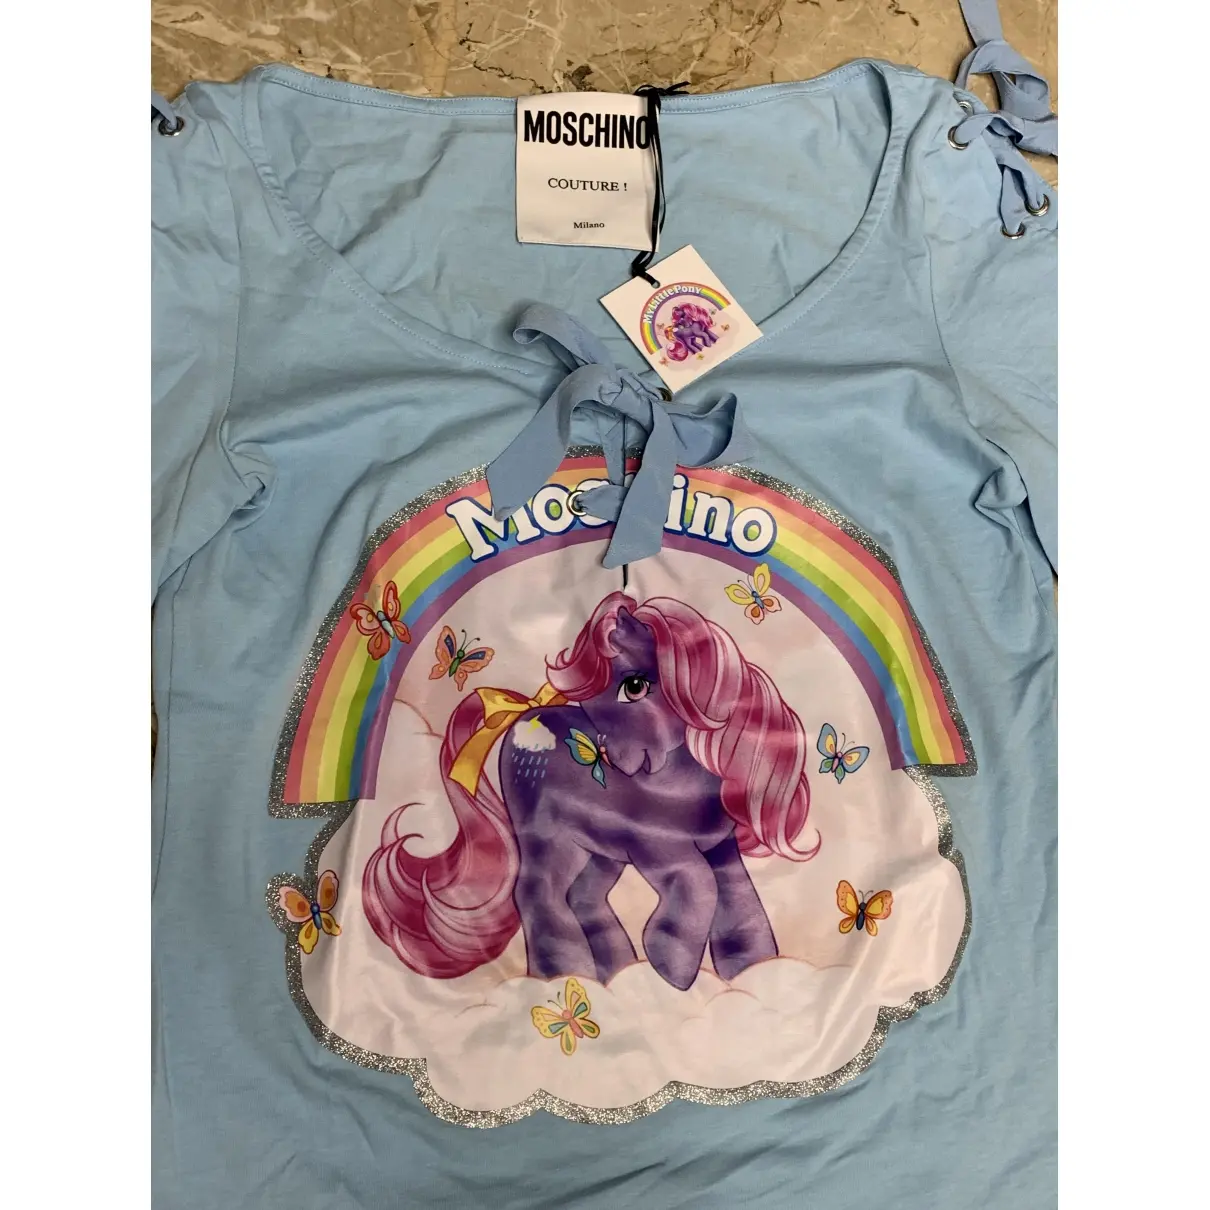 Moschino T-shirt for sale